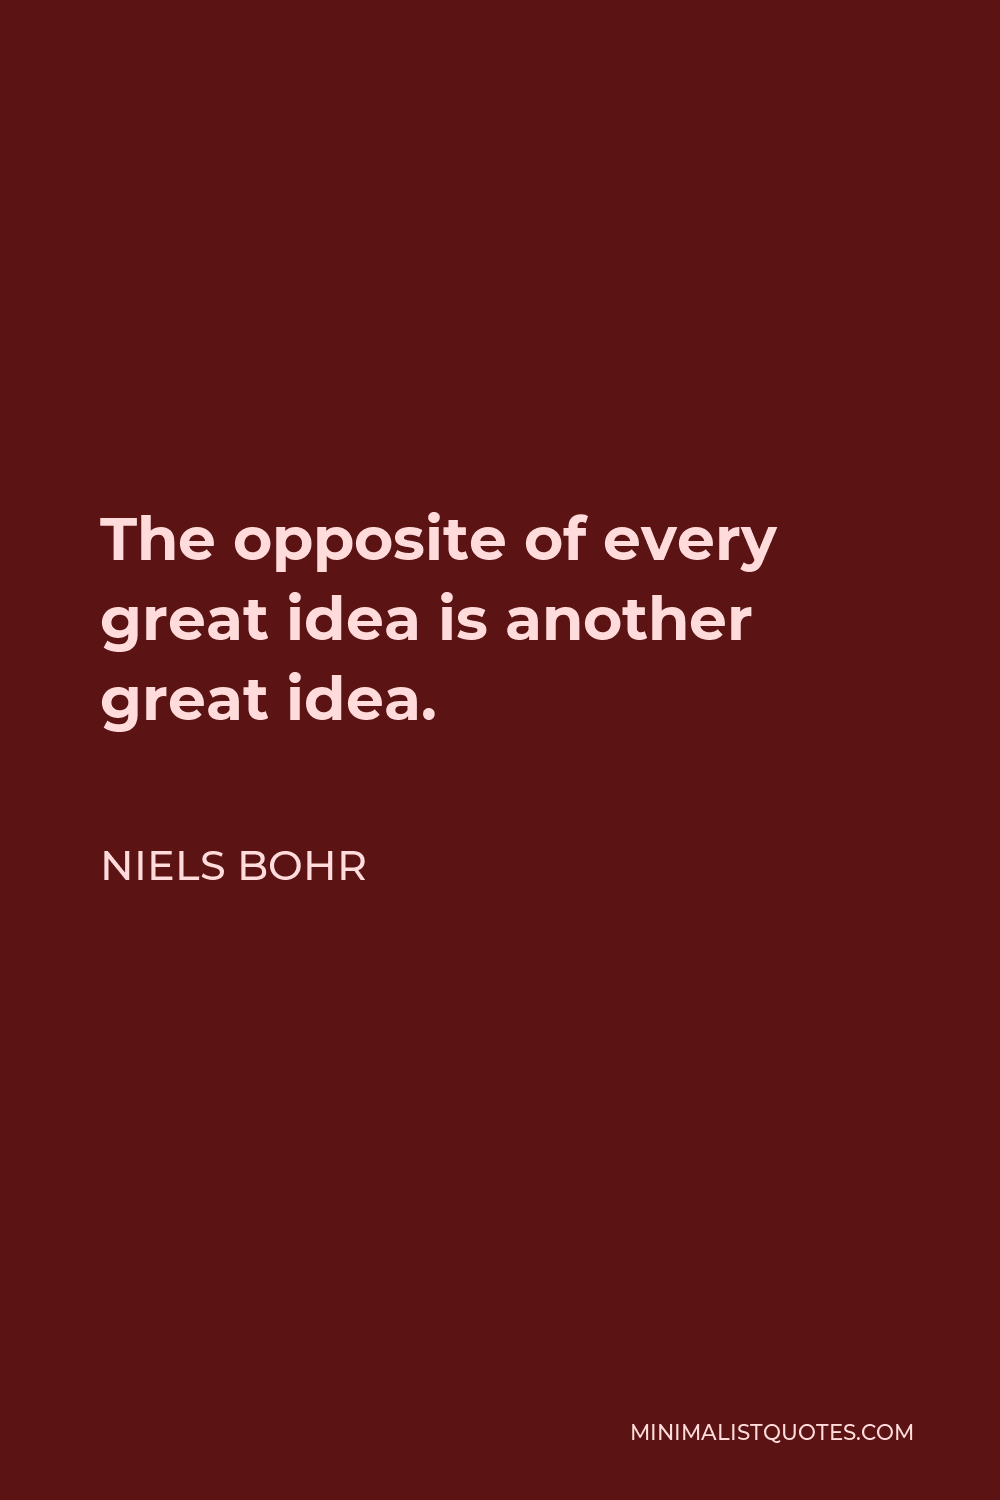 Niels Bohr Quote - The opposite of every great idea is another great idea.